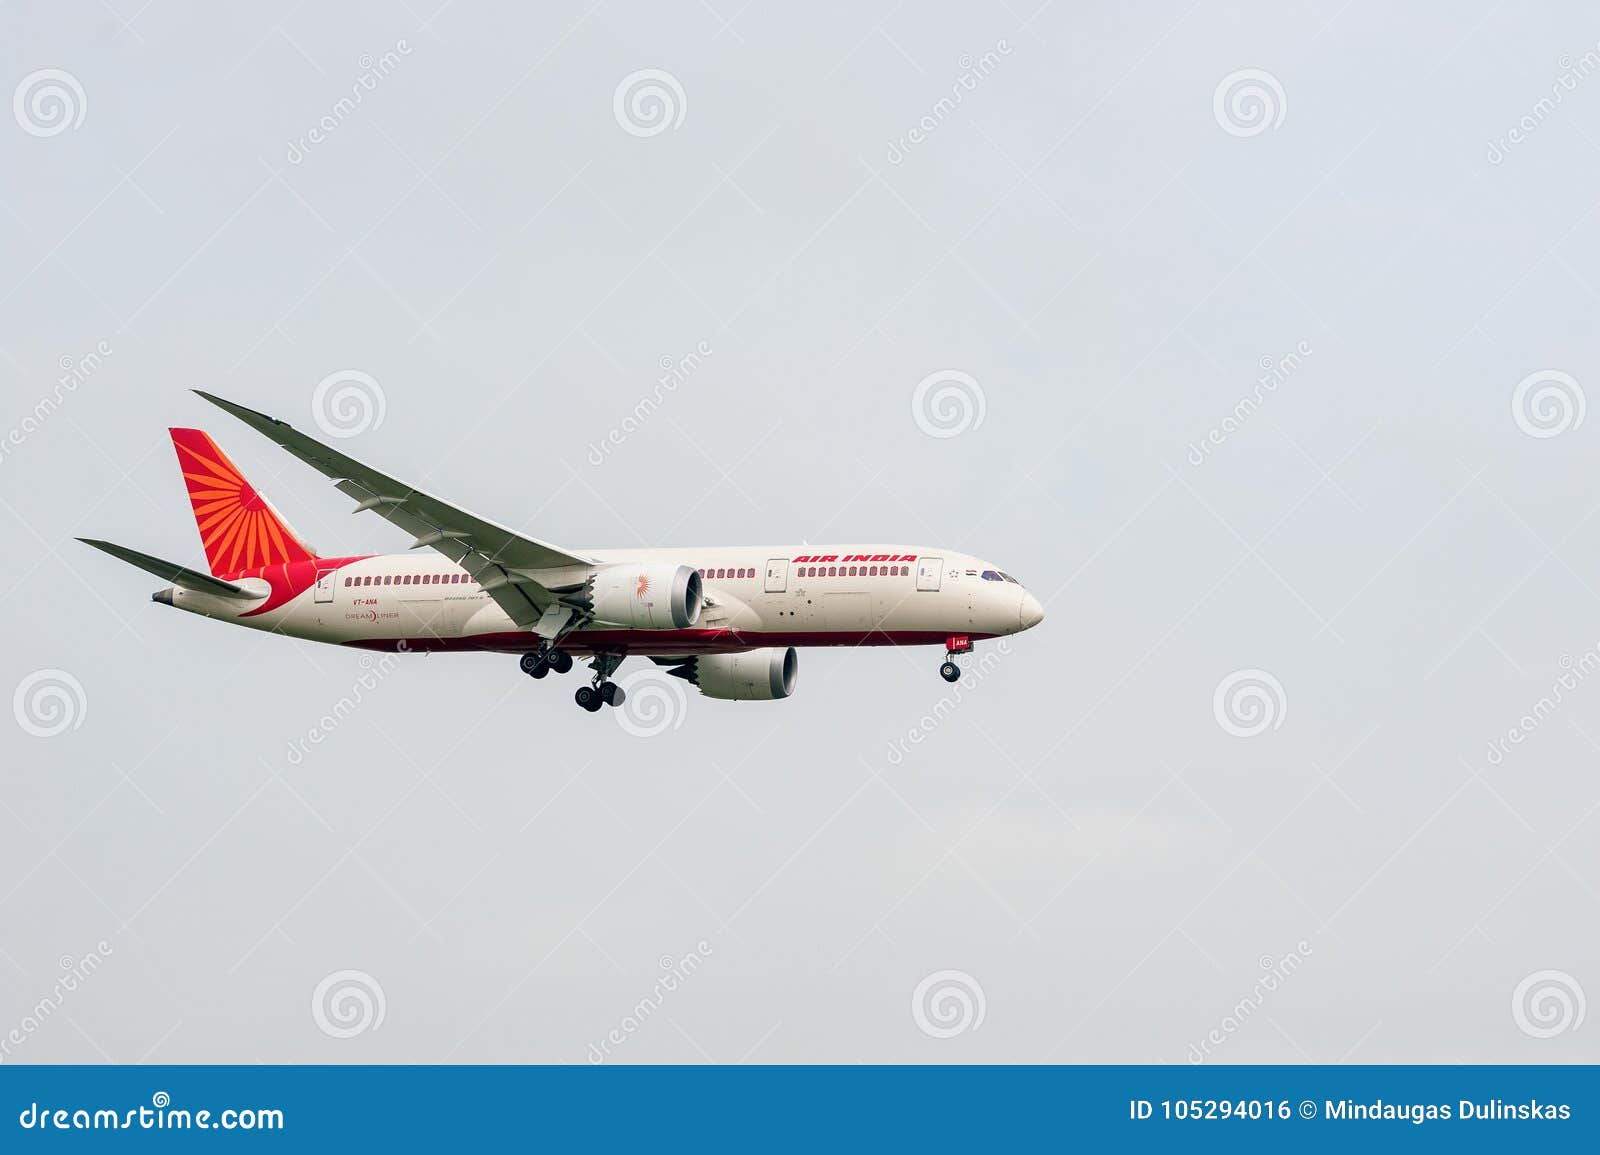 LONDON, ENGLAND - SEPTEMBER 27, 2017: Air India Airlines ...